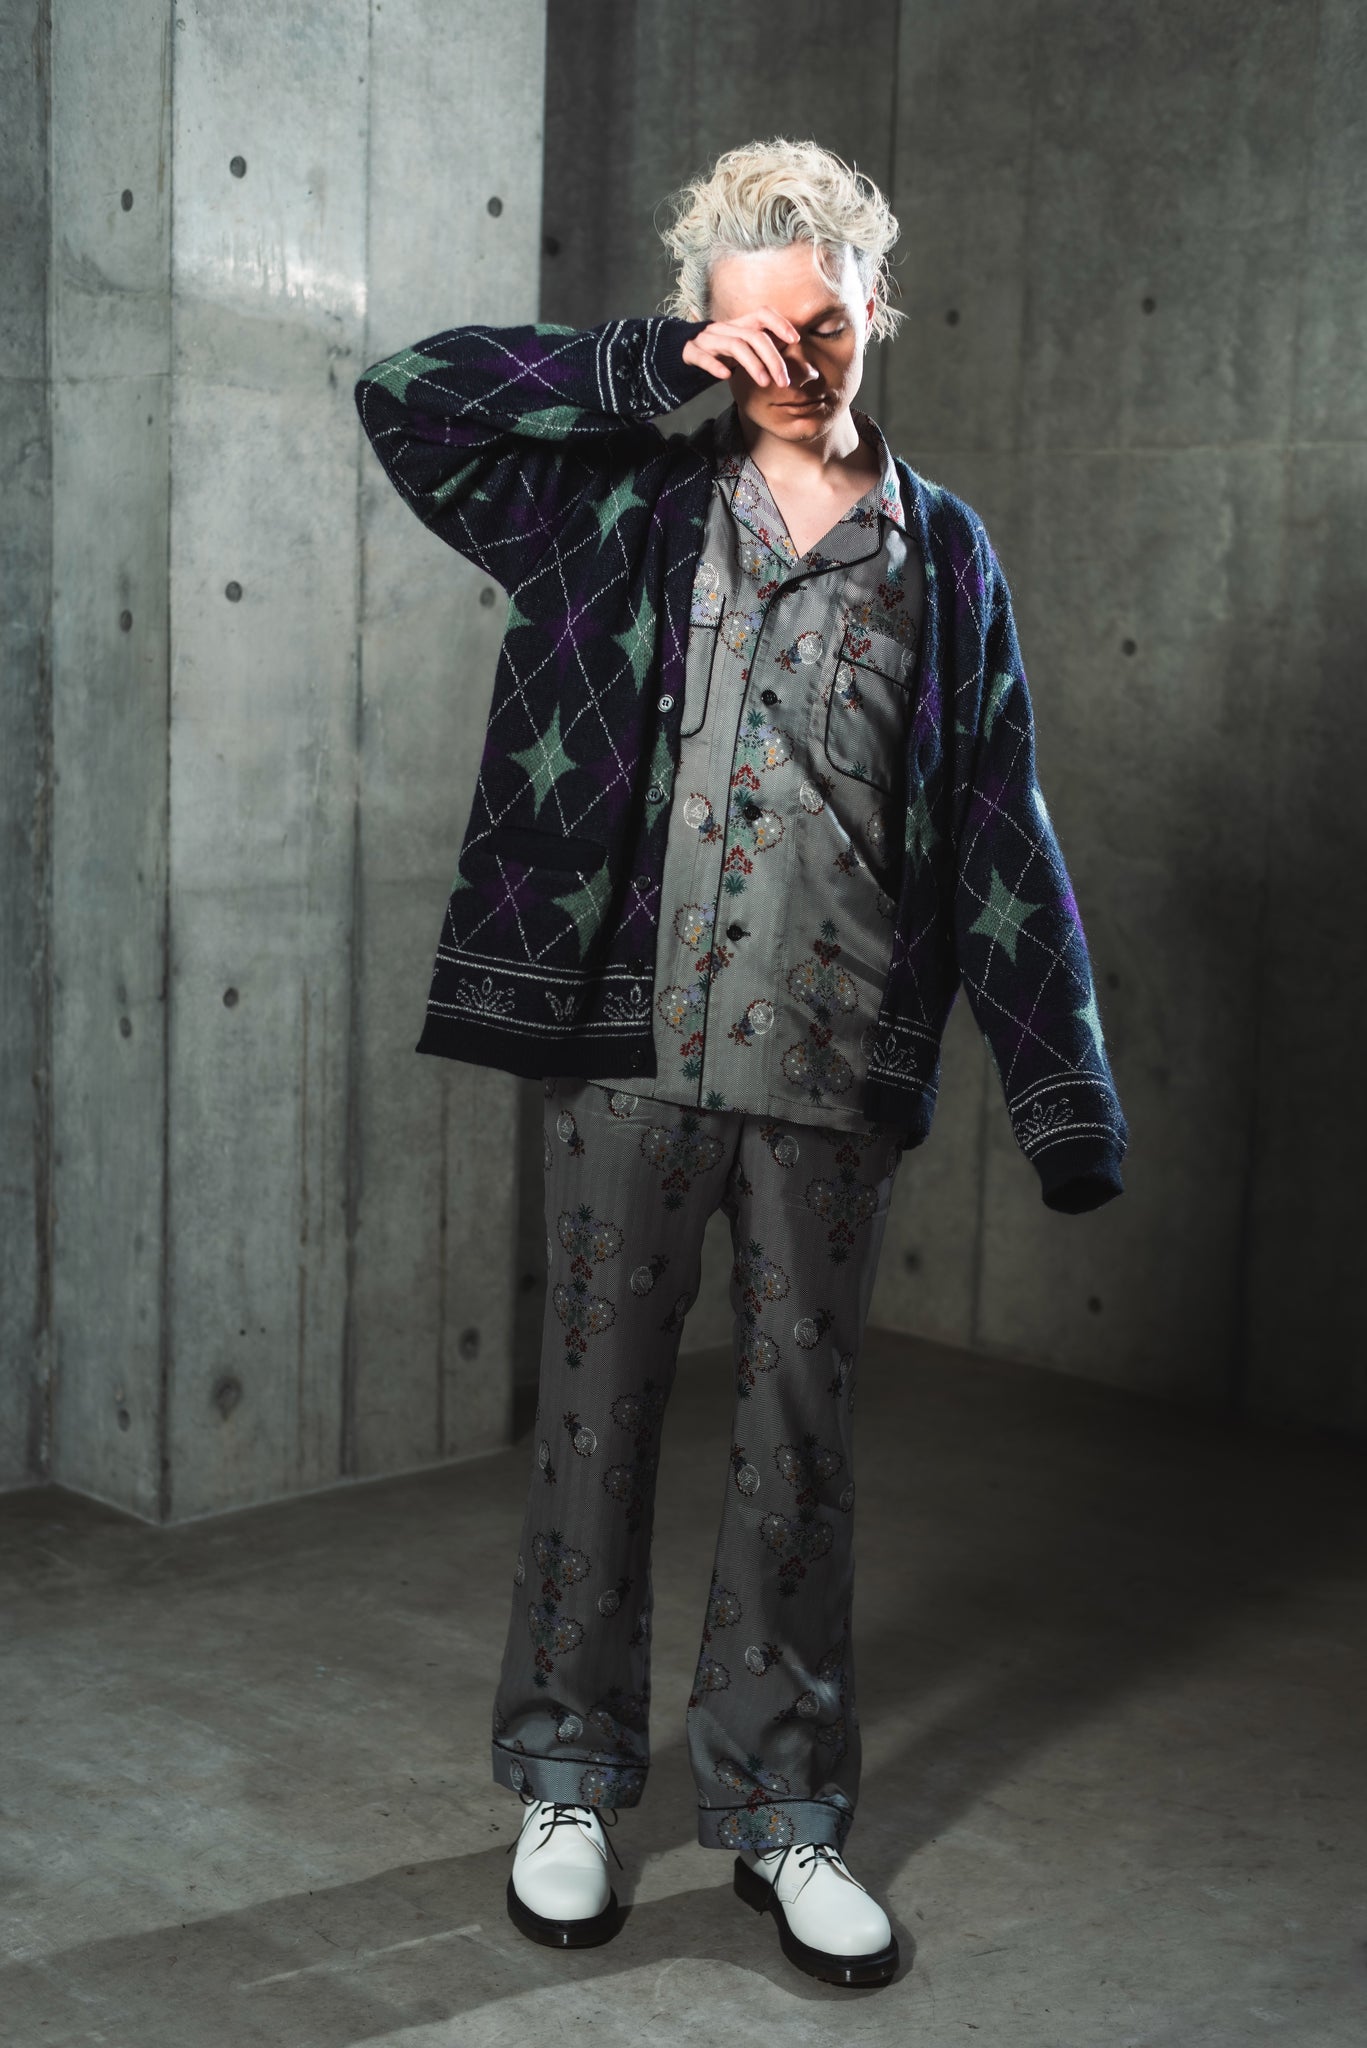 Taiga Igariの22awのLOOK